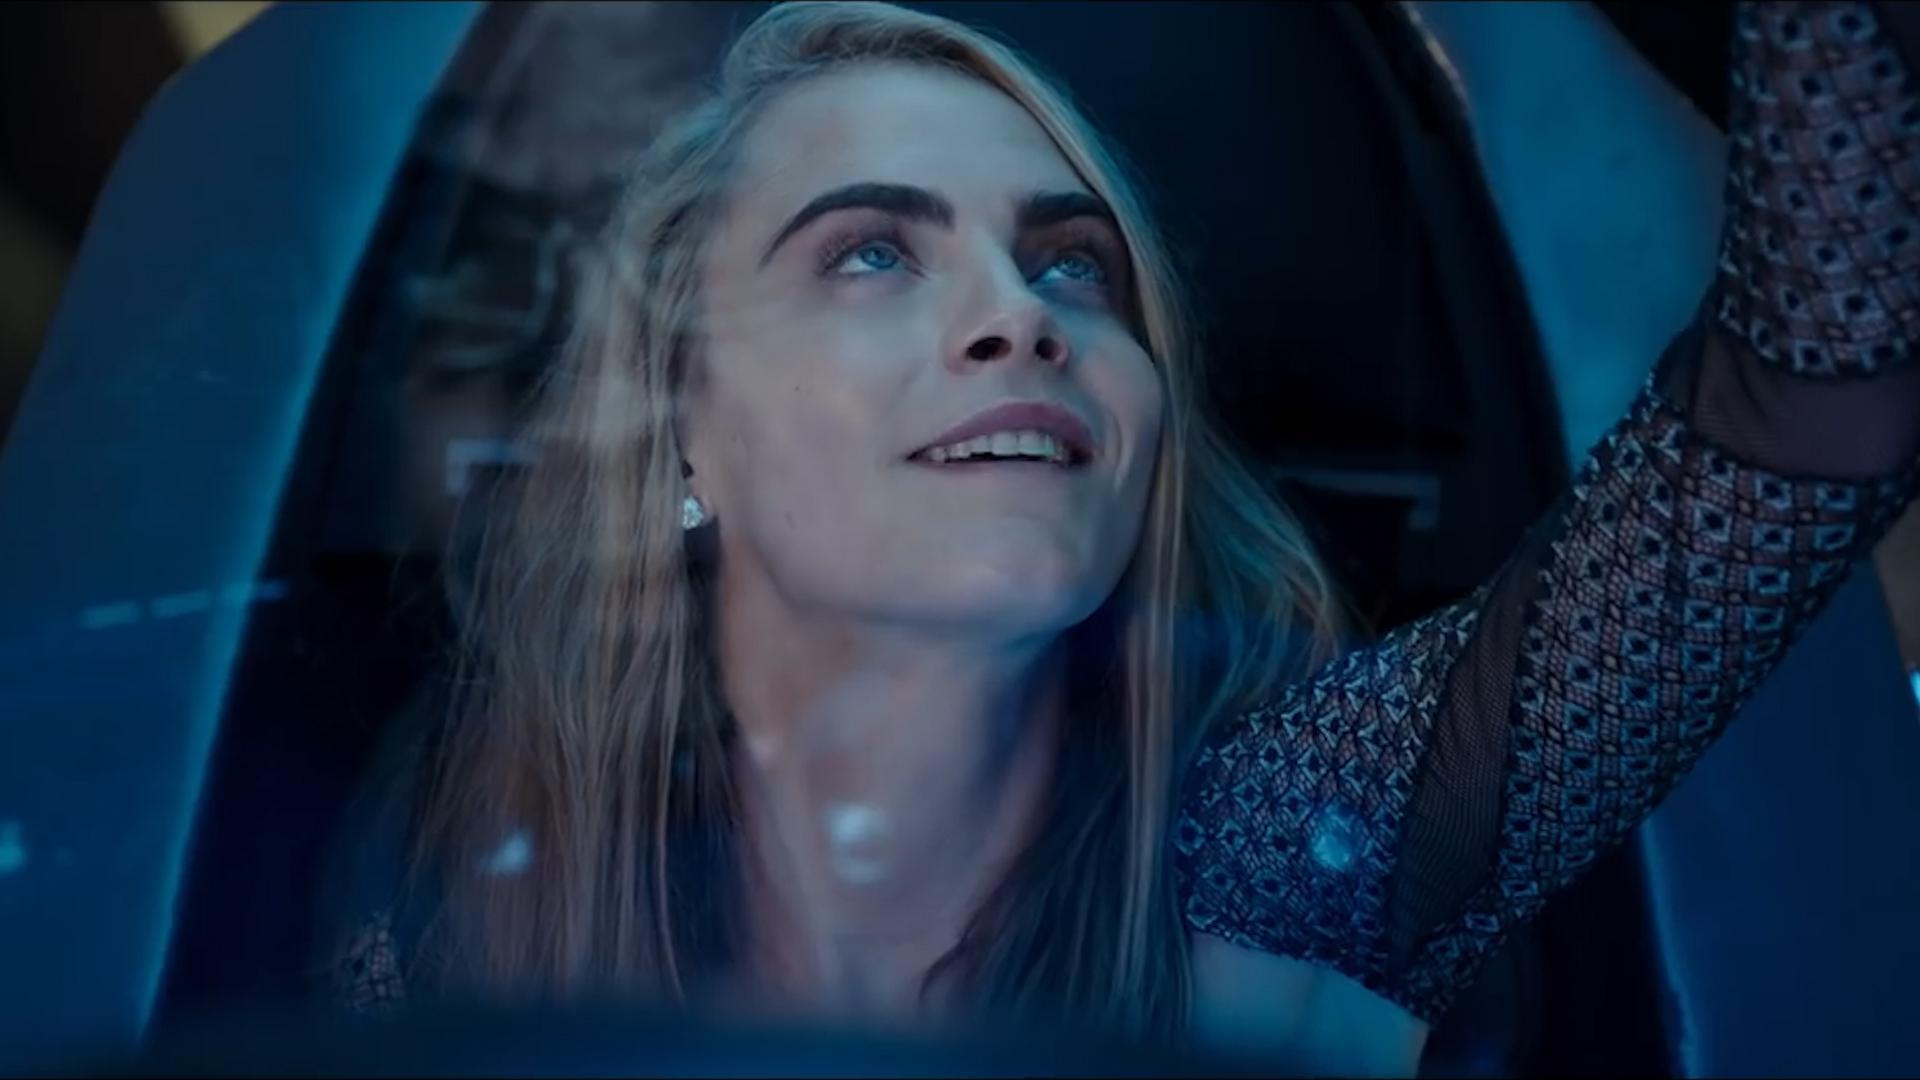 Cara Delevigne sets off on a mission across the universe in the brand new trailer for Valerian and the City of a Thousand Planets